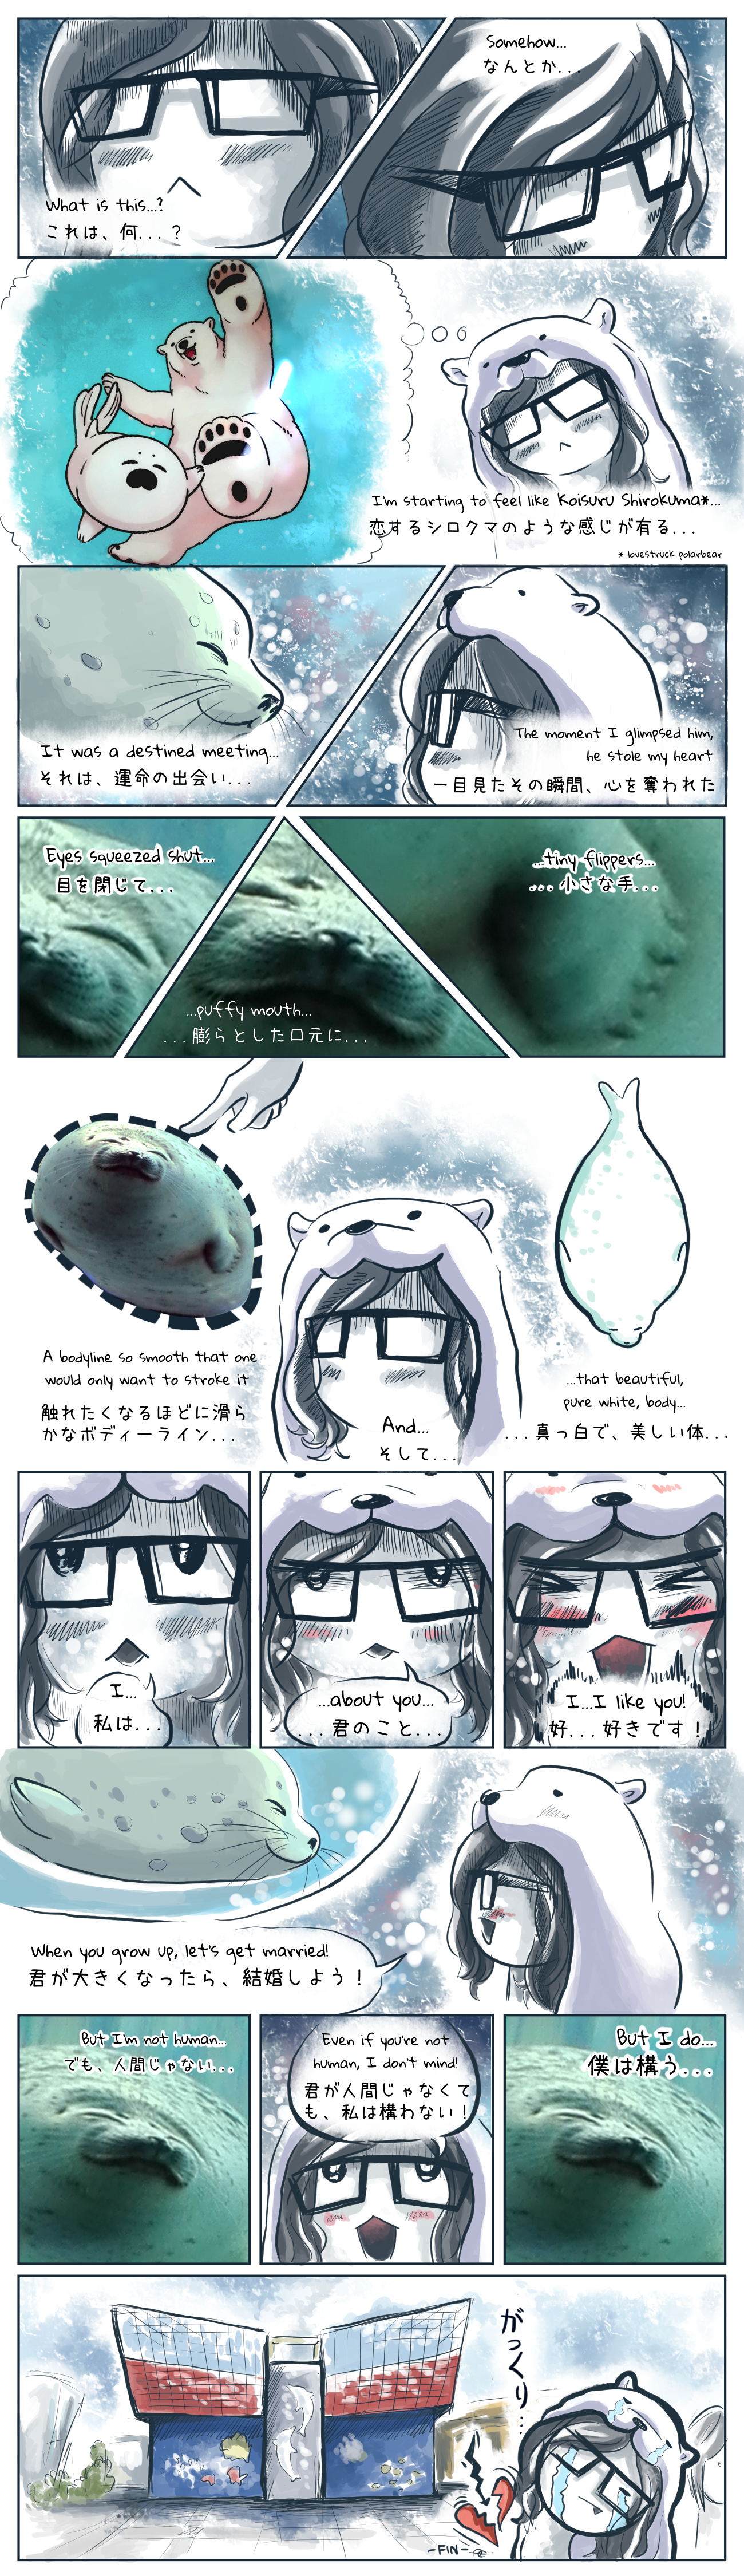 Page 4 of the 'Osaka Kaiyukan' episode of my webcomic, 'I Went to Japan', showing how the seal breaks my heart